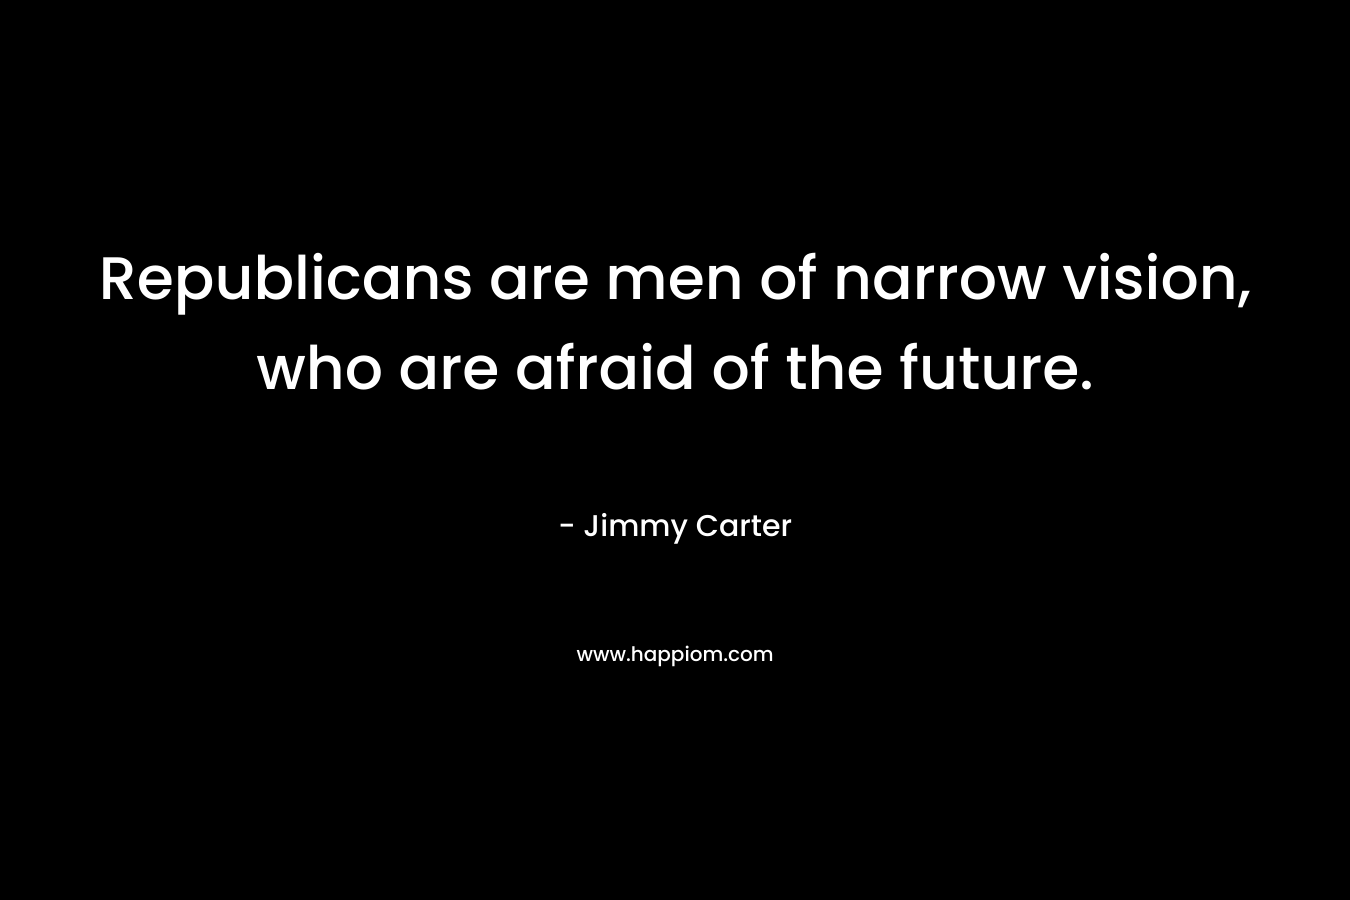 Republicans are men of narrow vision, who are afraid of the future. – Jimmy Carter